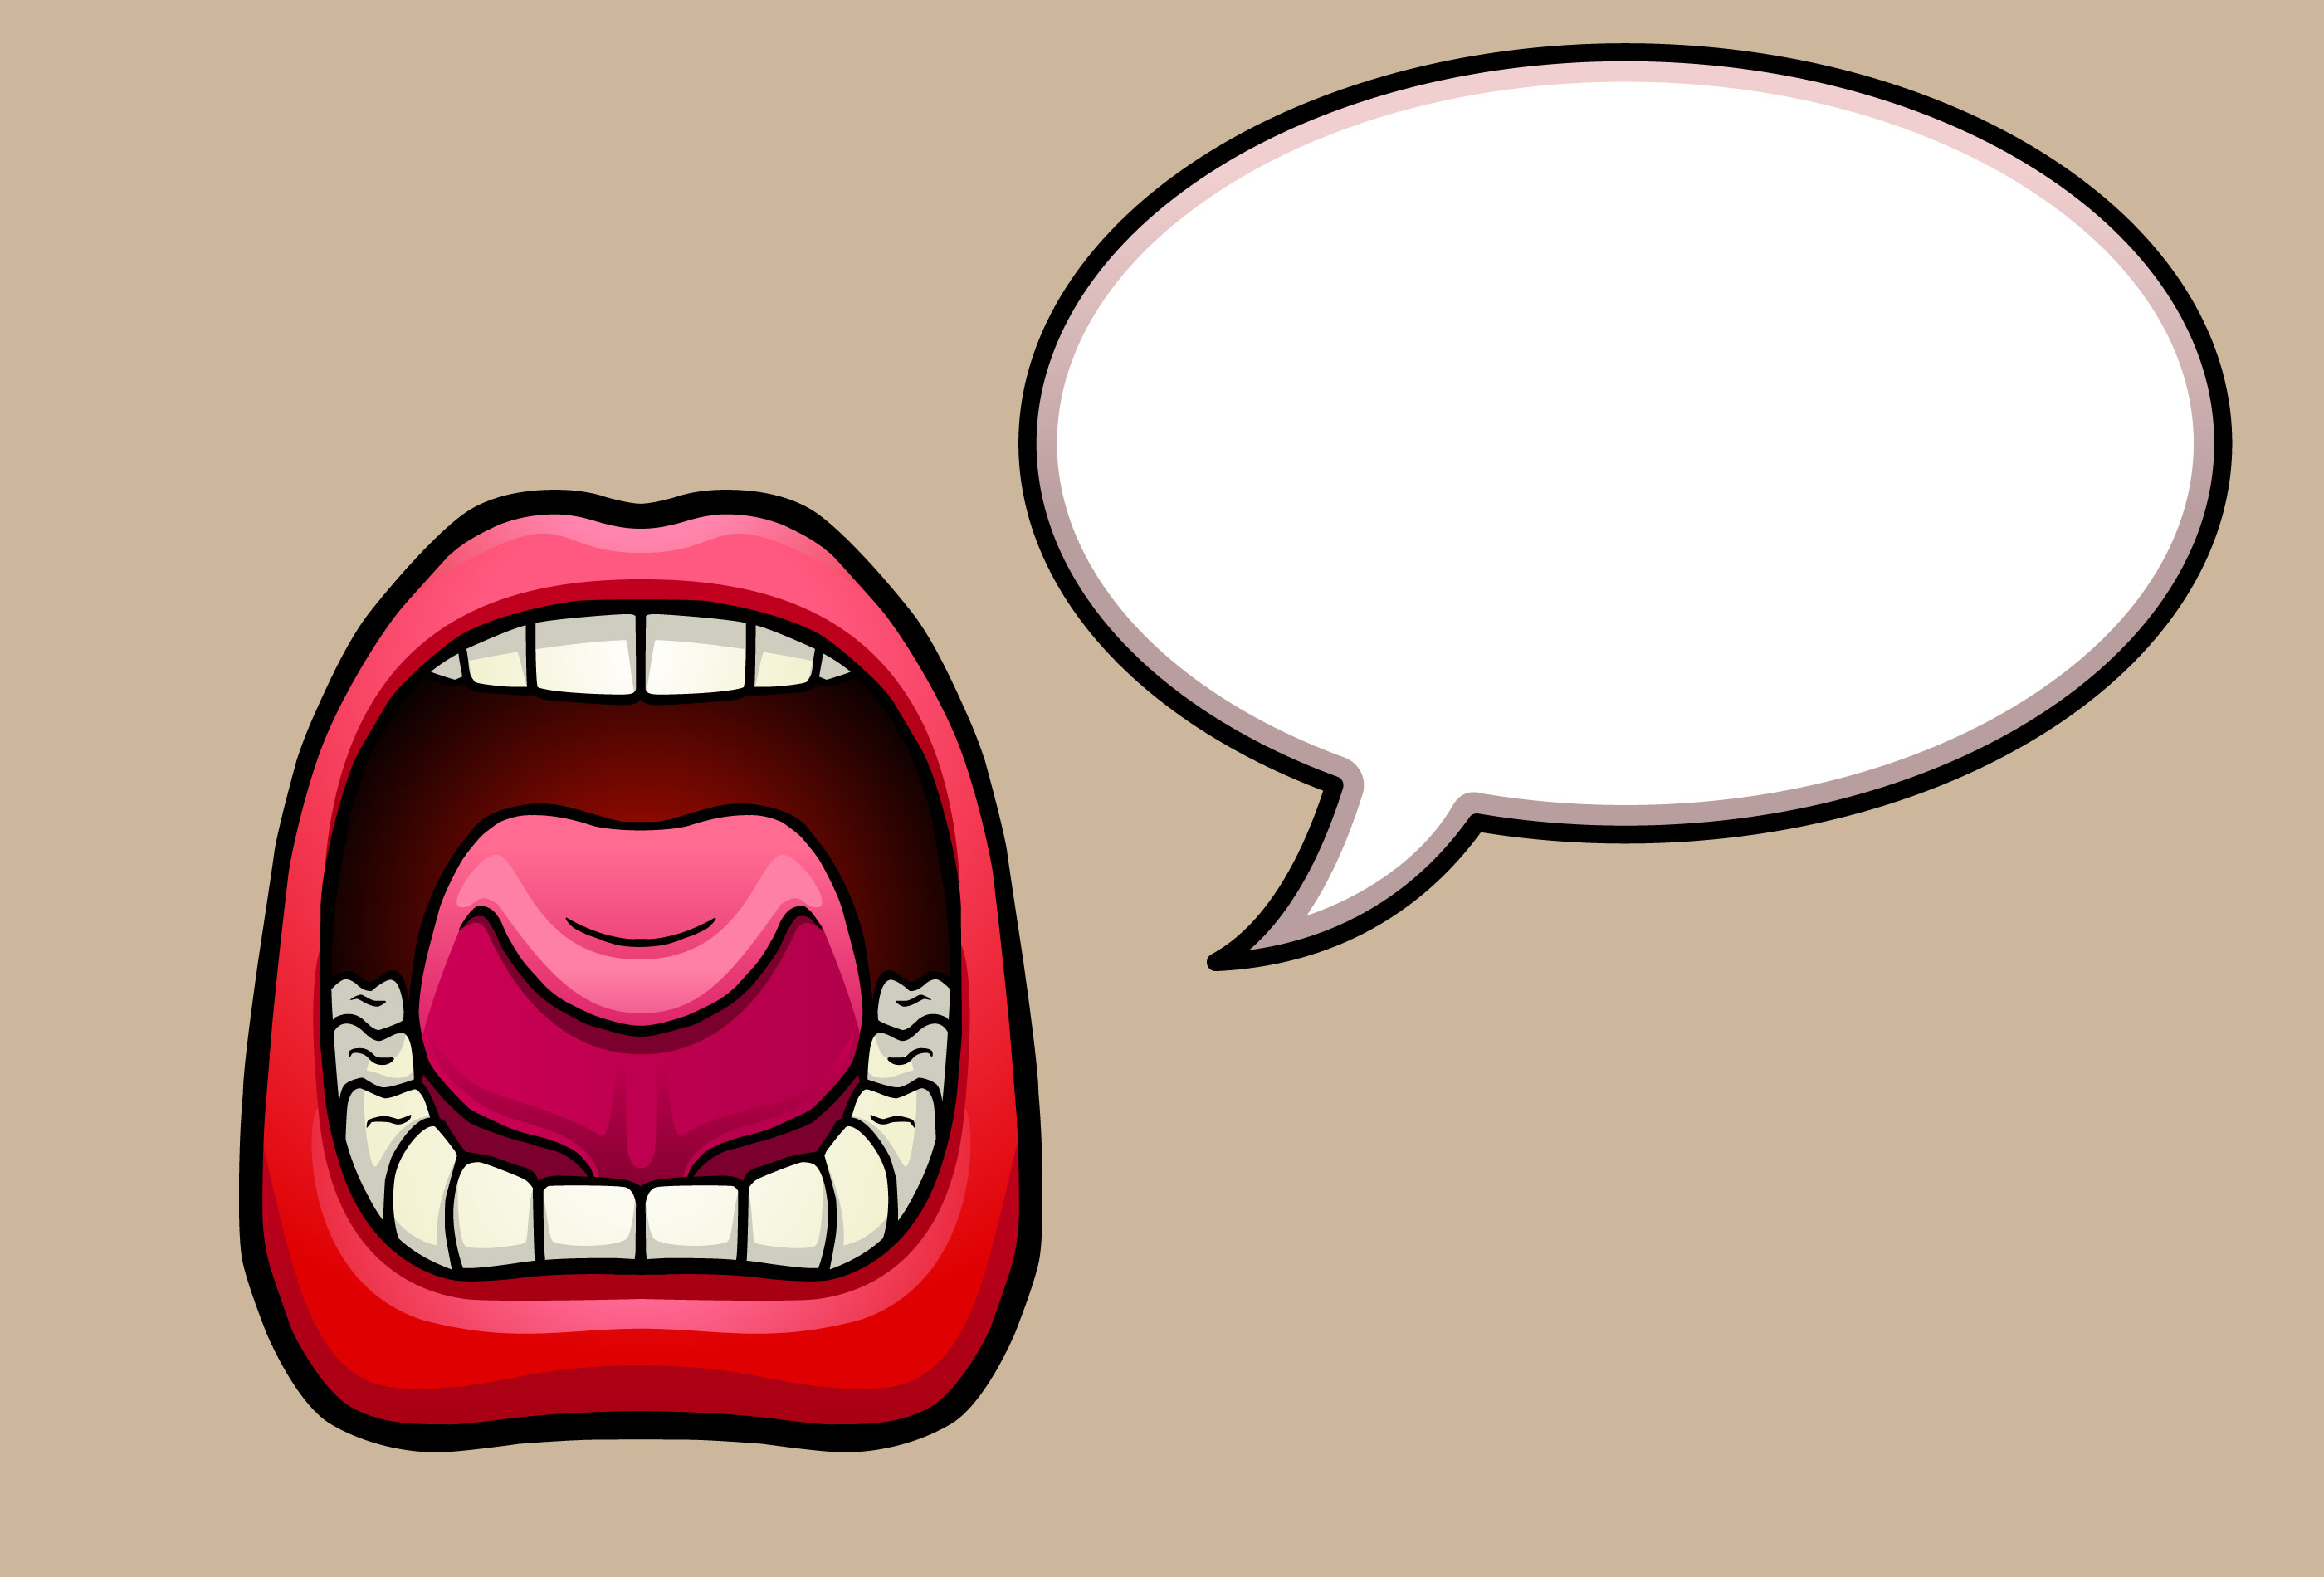 Person with speech bubble clipart